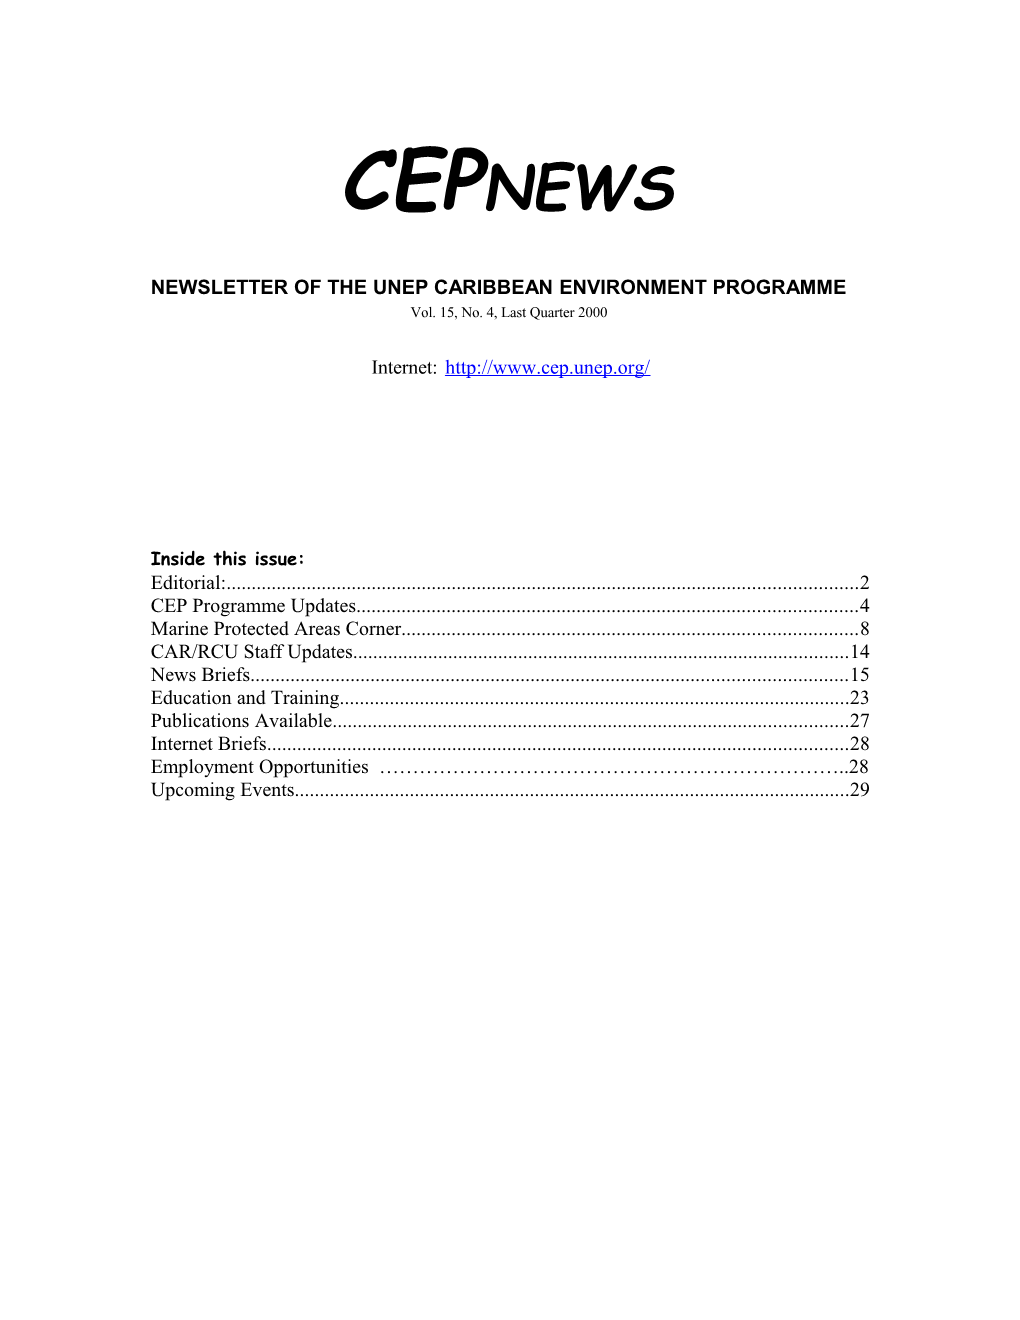 Newsletter of the Unep Caribbean Environment Programme